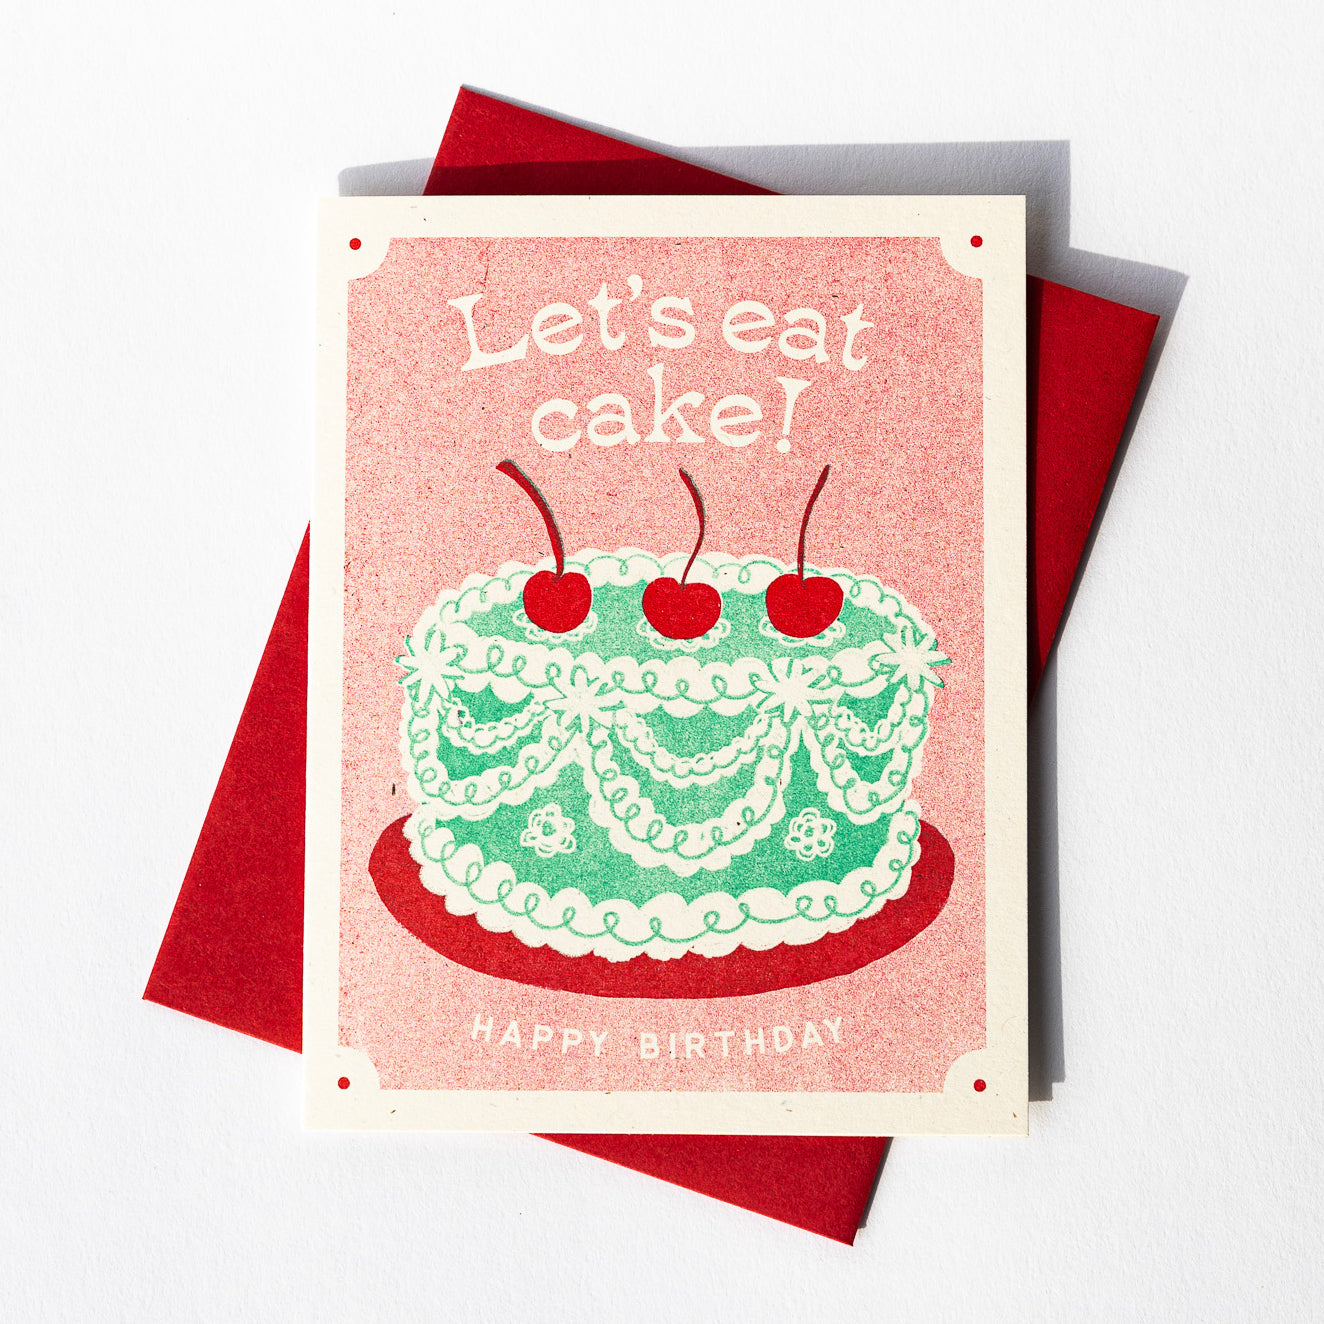 Let's Eat Cake - Risograph Birthday Card